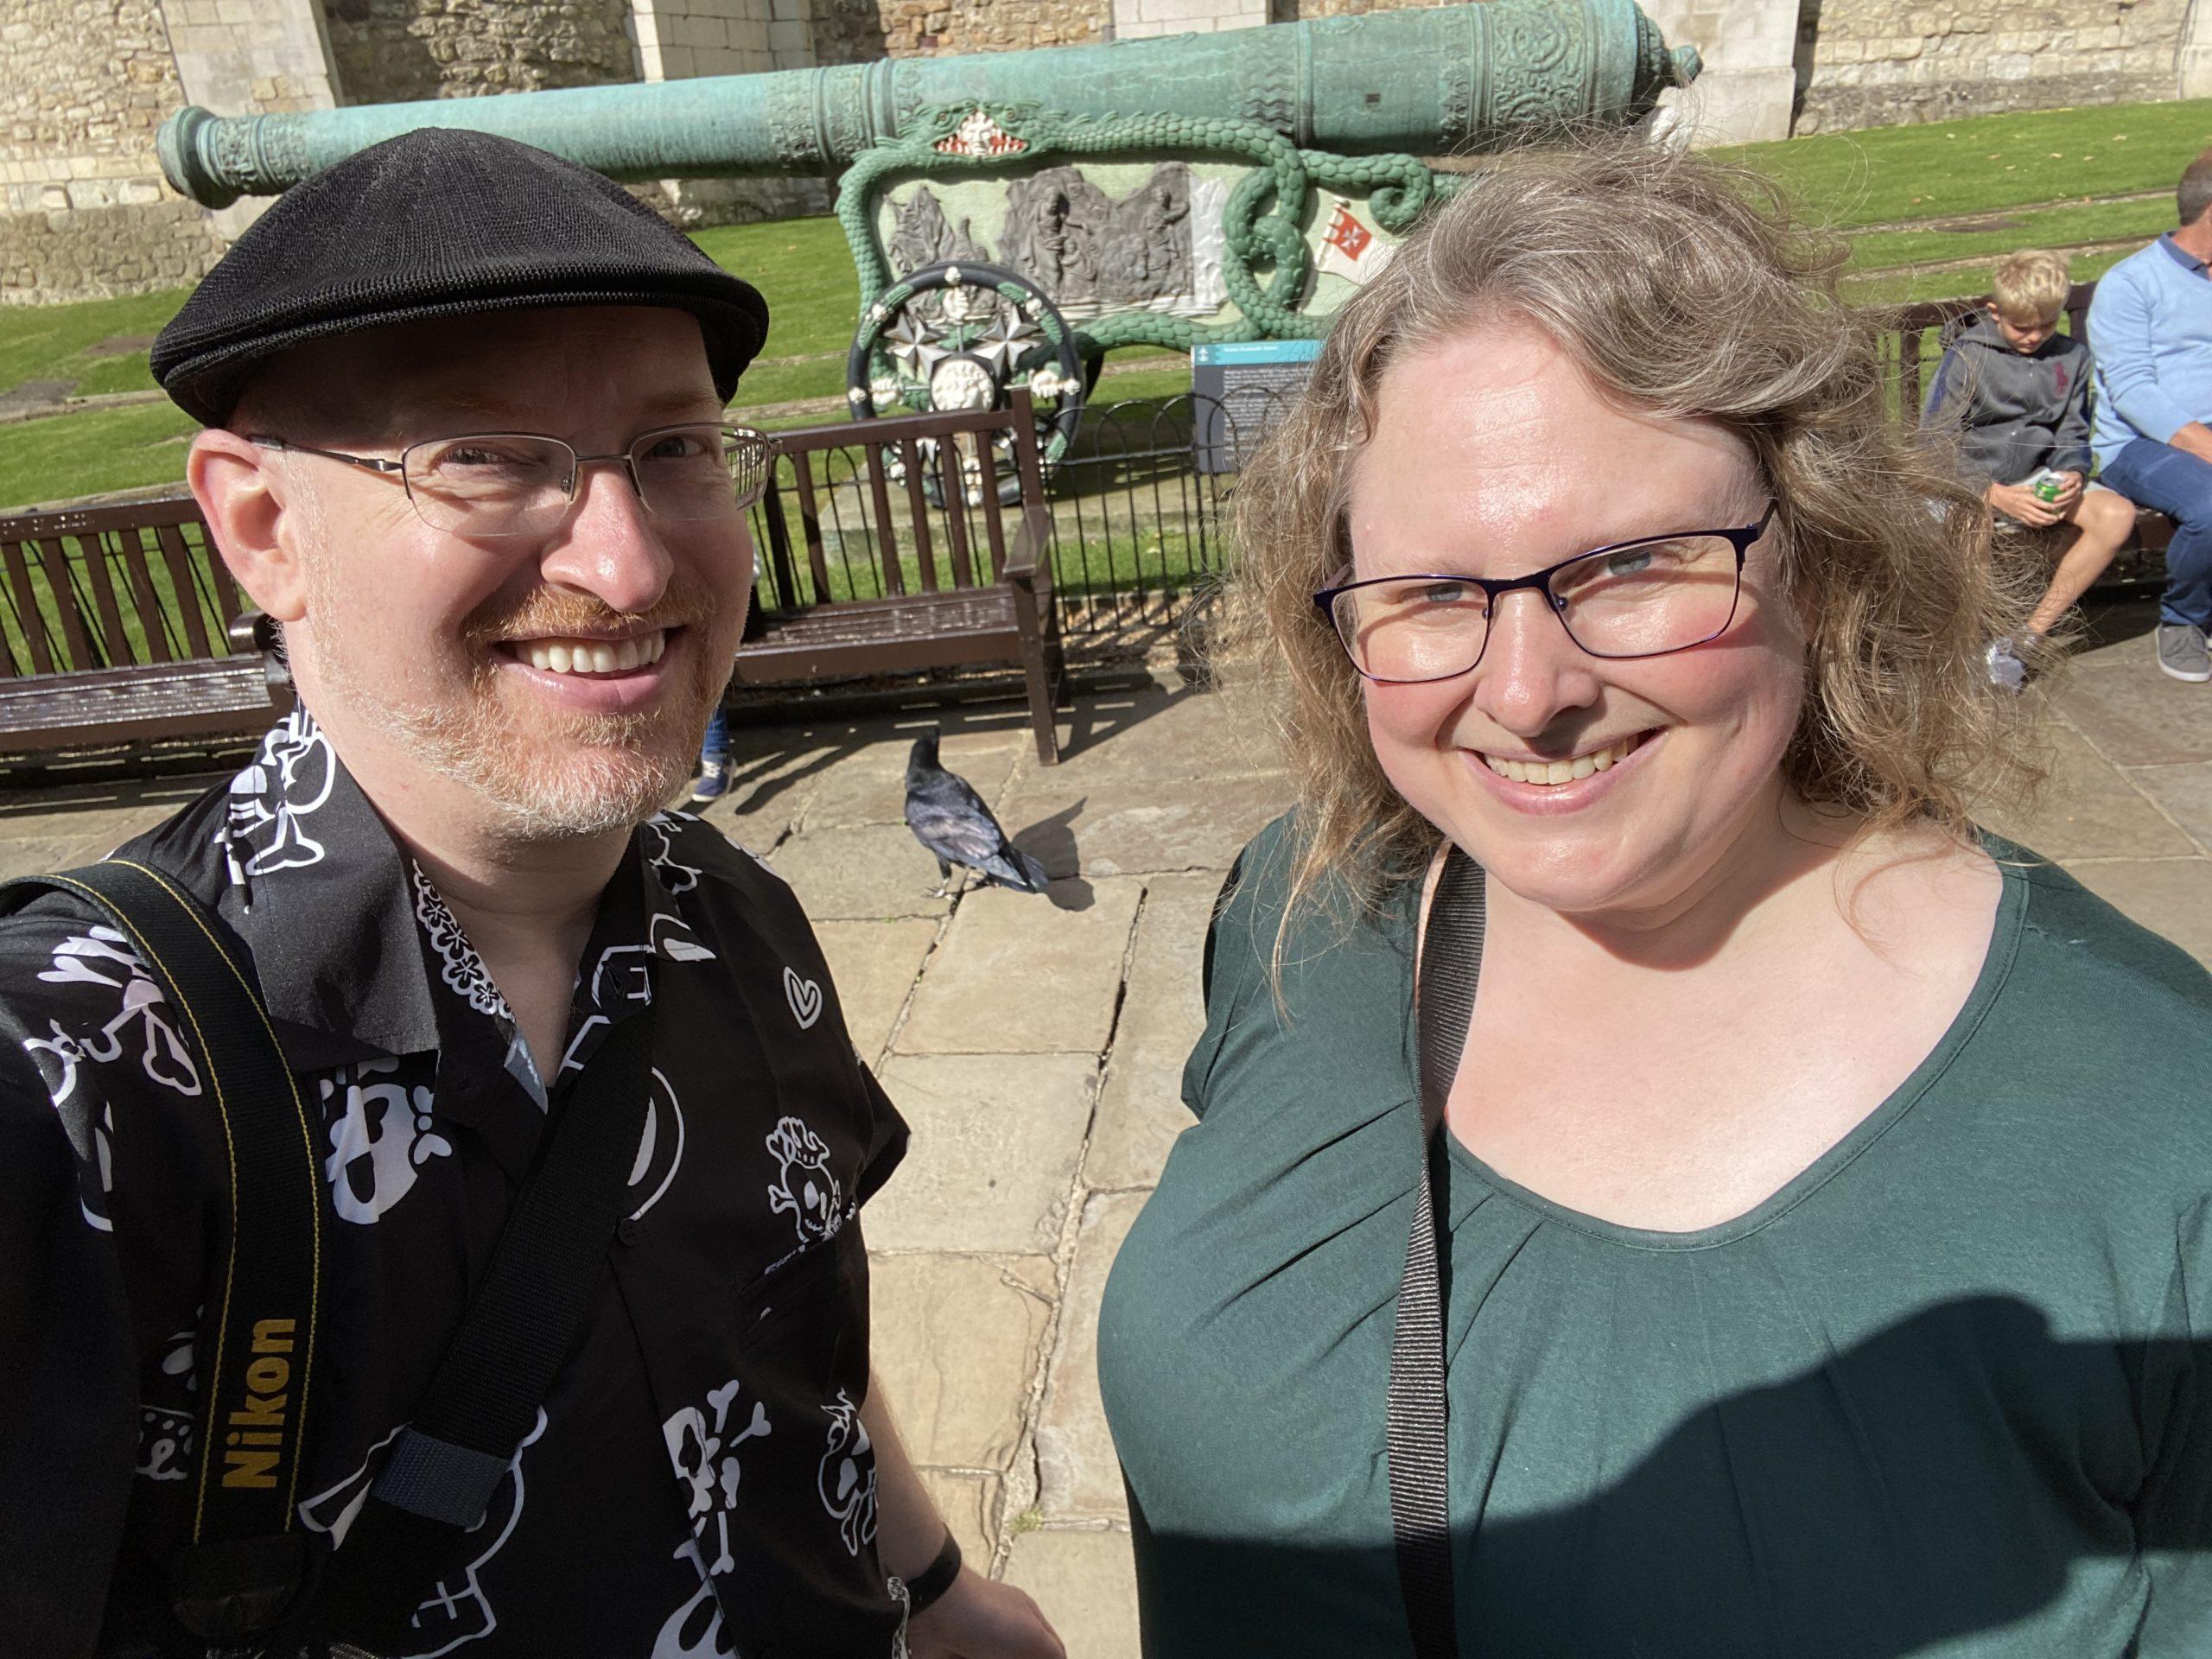 My wife and I at the Tower of London, with one of its famous ravens visible behind us.